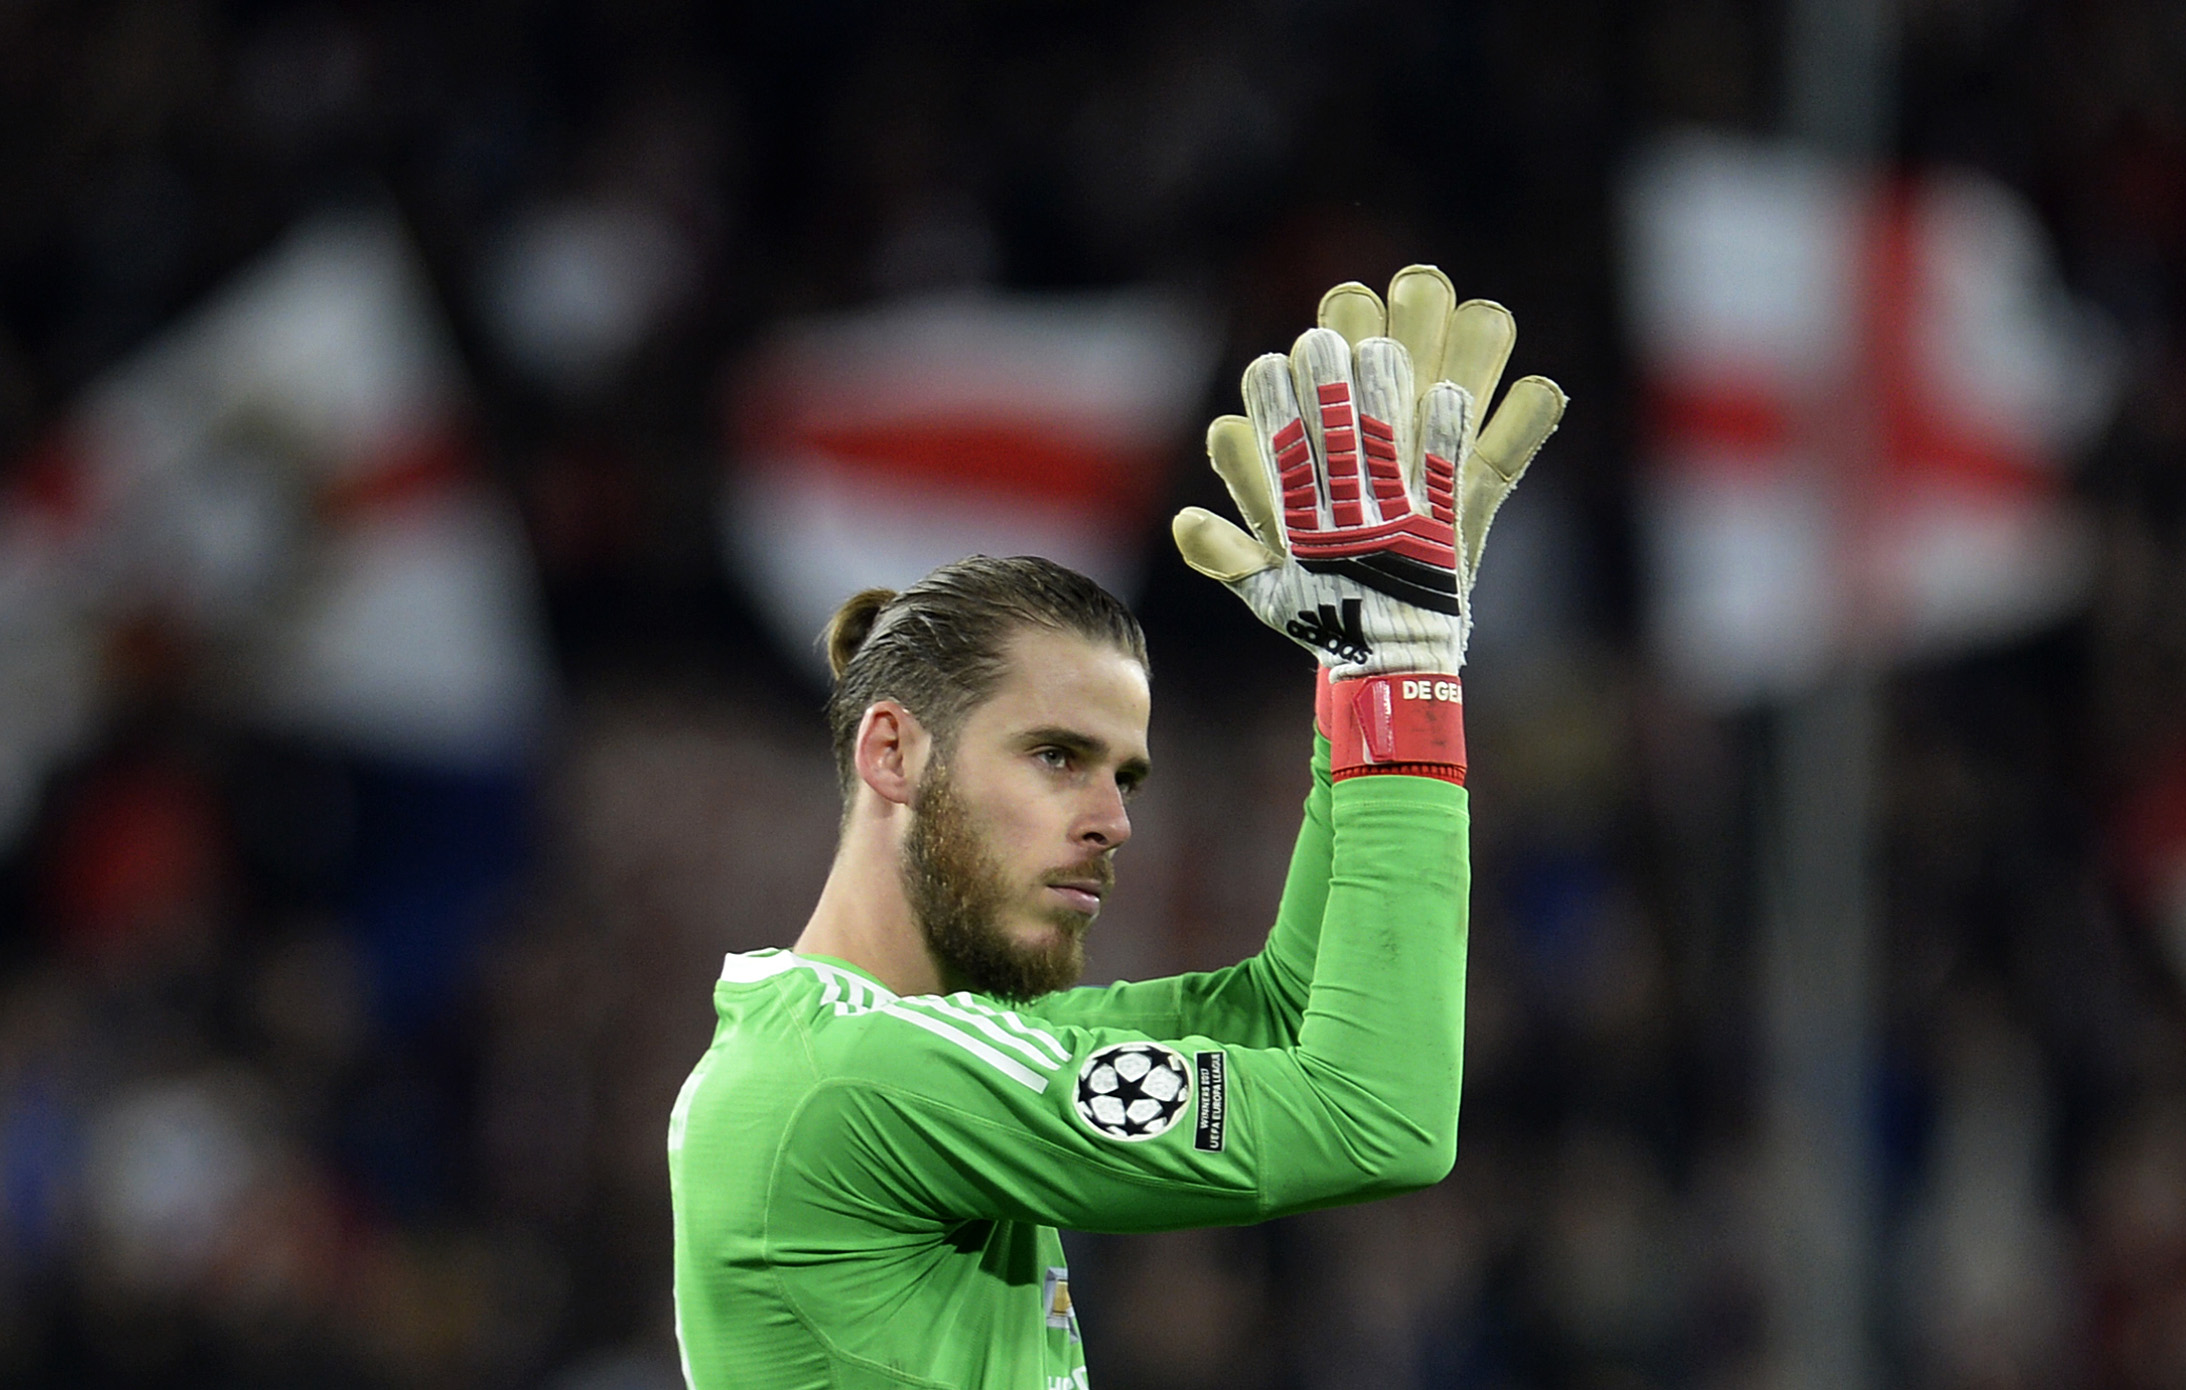 Manchester United's Spanish goalkeeper David de Gea applauds at the end of the UEFA Champions League round of 16 first leg football match Sevilla FC against Manchester United at the Ramon Sanchez Pizjuan stadium in Sevilla on February 21, 2018. / AFP PHOTO / Cristina Quicler        (Photo credit should read CRISTINA QUICLER/AFP/Getty Images)